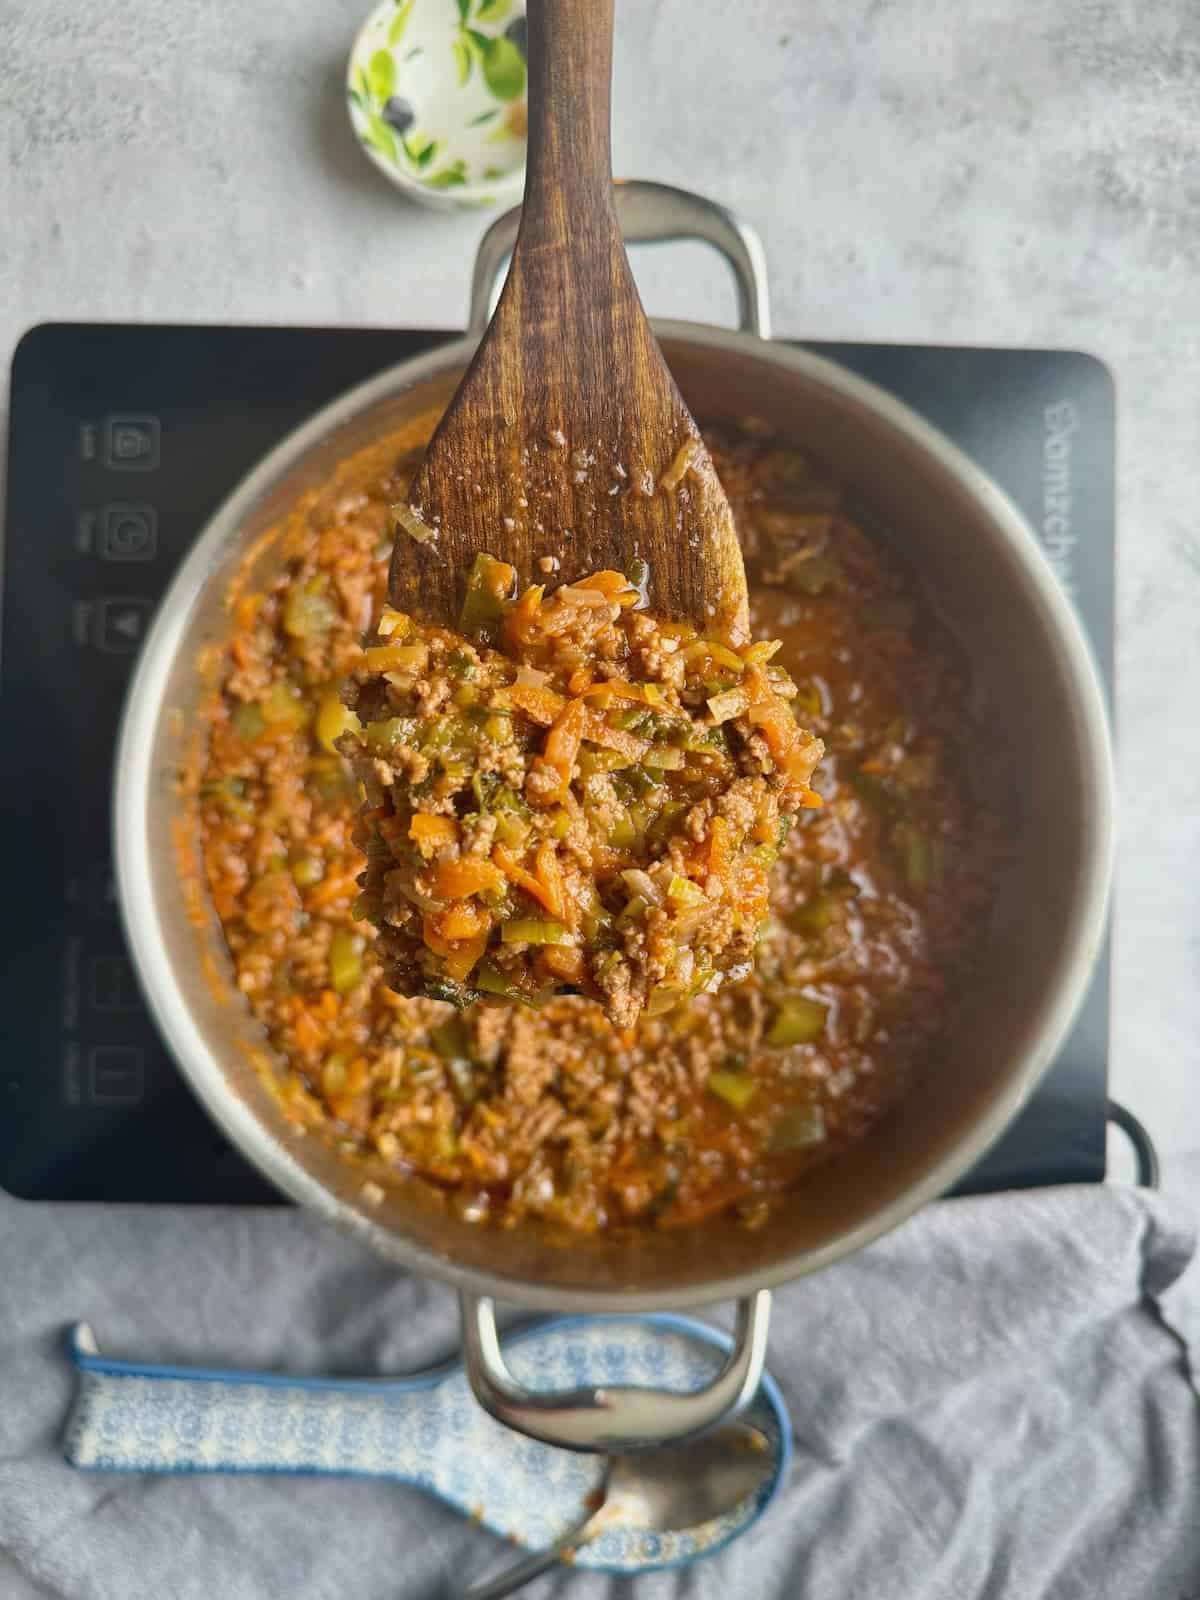 Veggie loaded bolognese ready with wooden spatula showing the sauce.